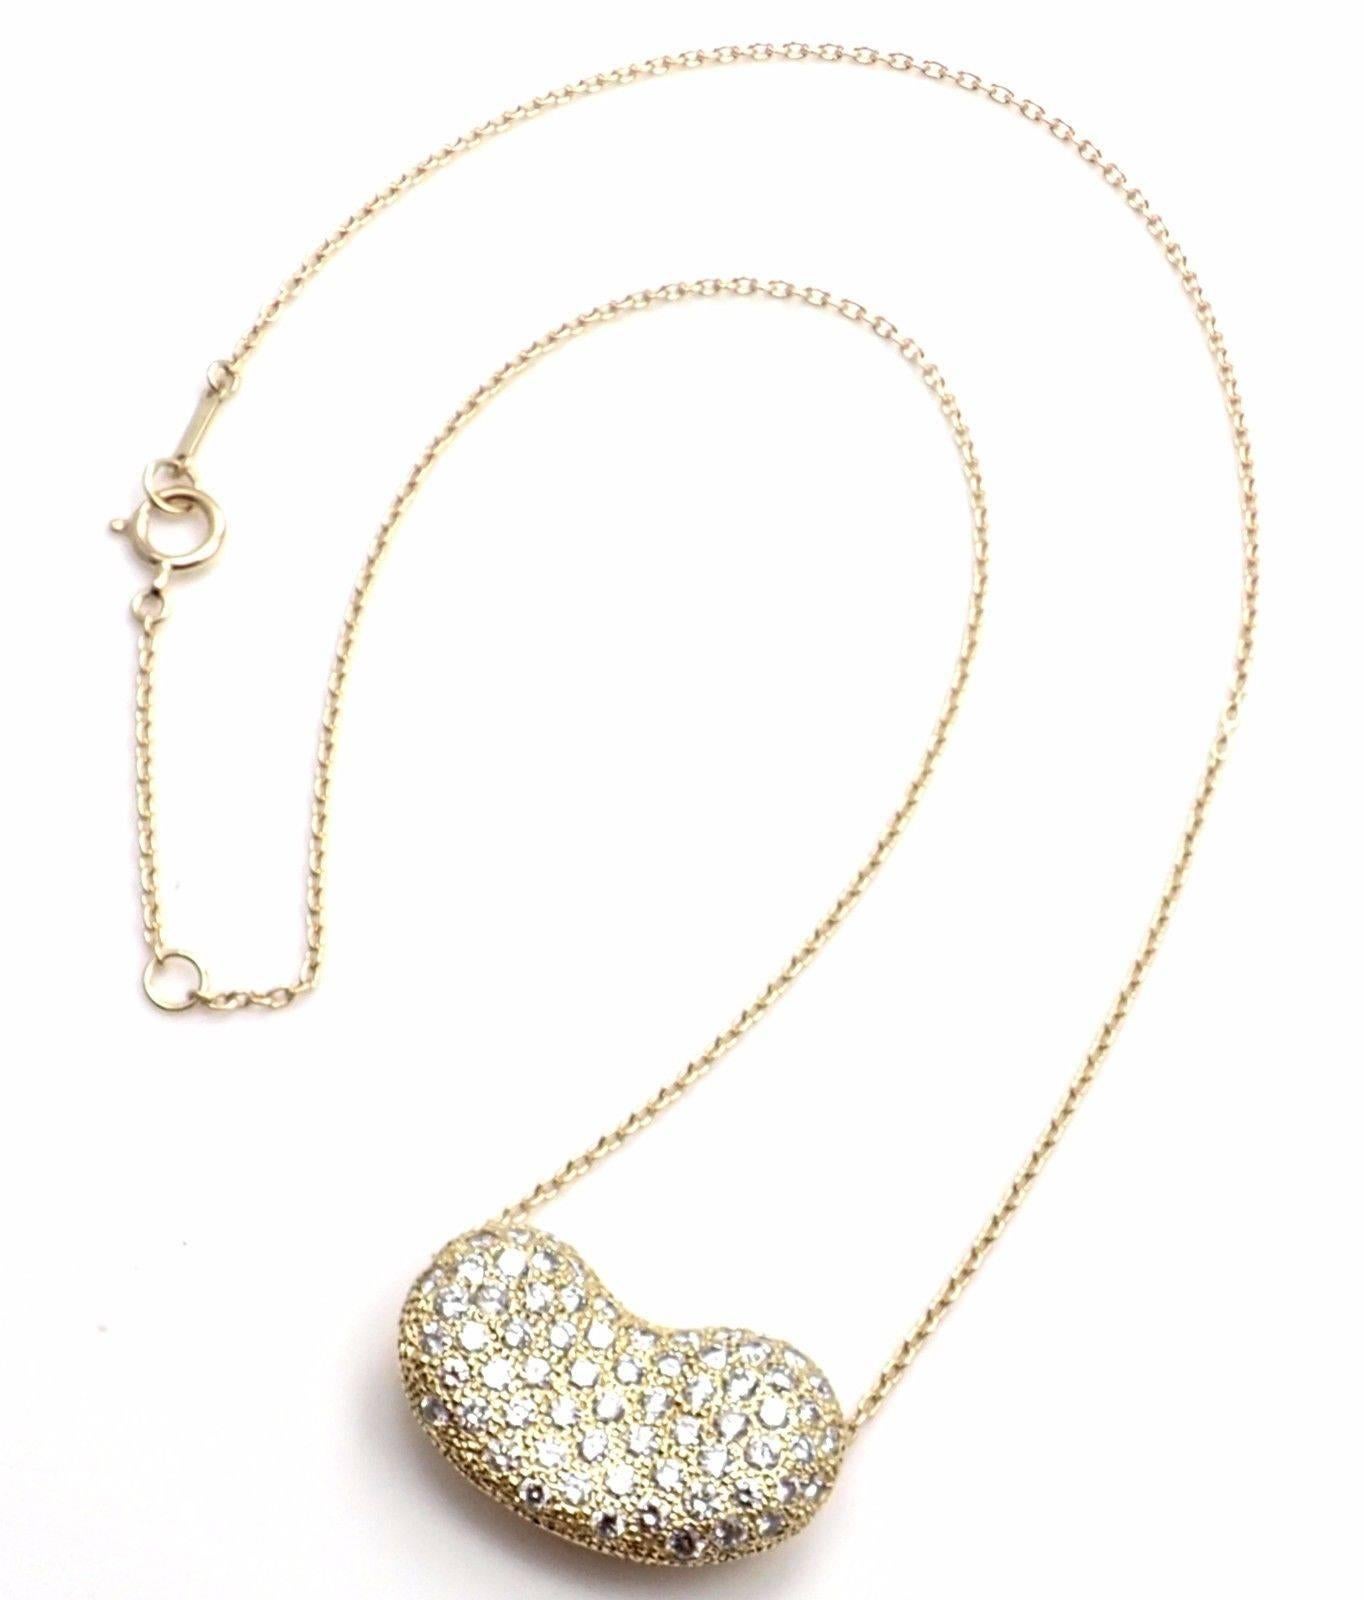 18k Yellow Gold Diamond Large Bean Pendant Necklace by Elsa Peretti for Tiffany & Co.
With Round brilliant cut diamonds VS1 clarity, E color total weight approx. 2.13ct
Details:
Length: 16